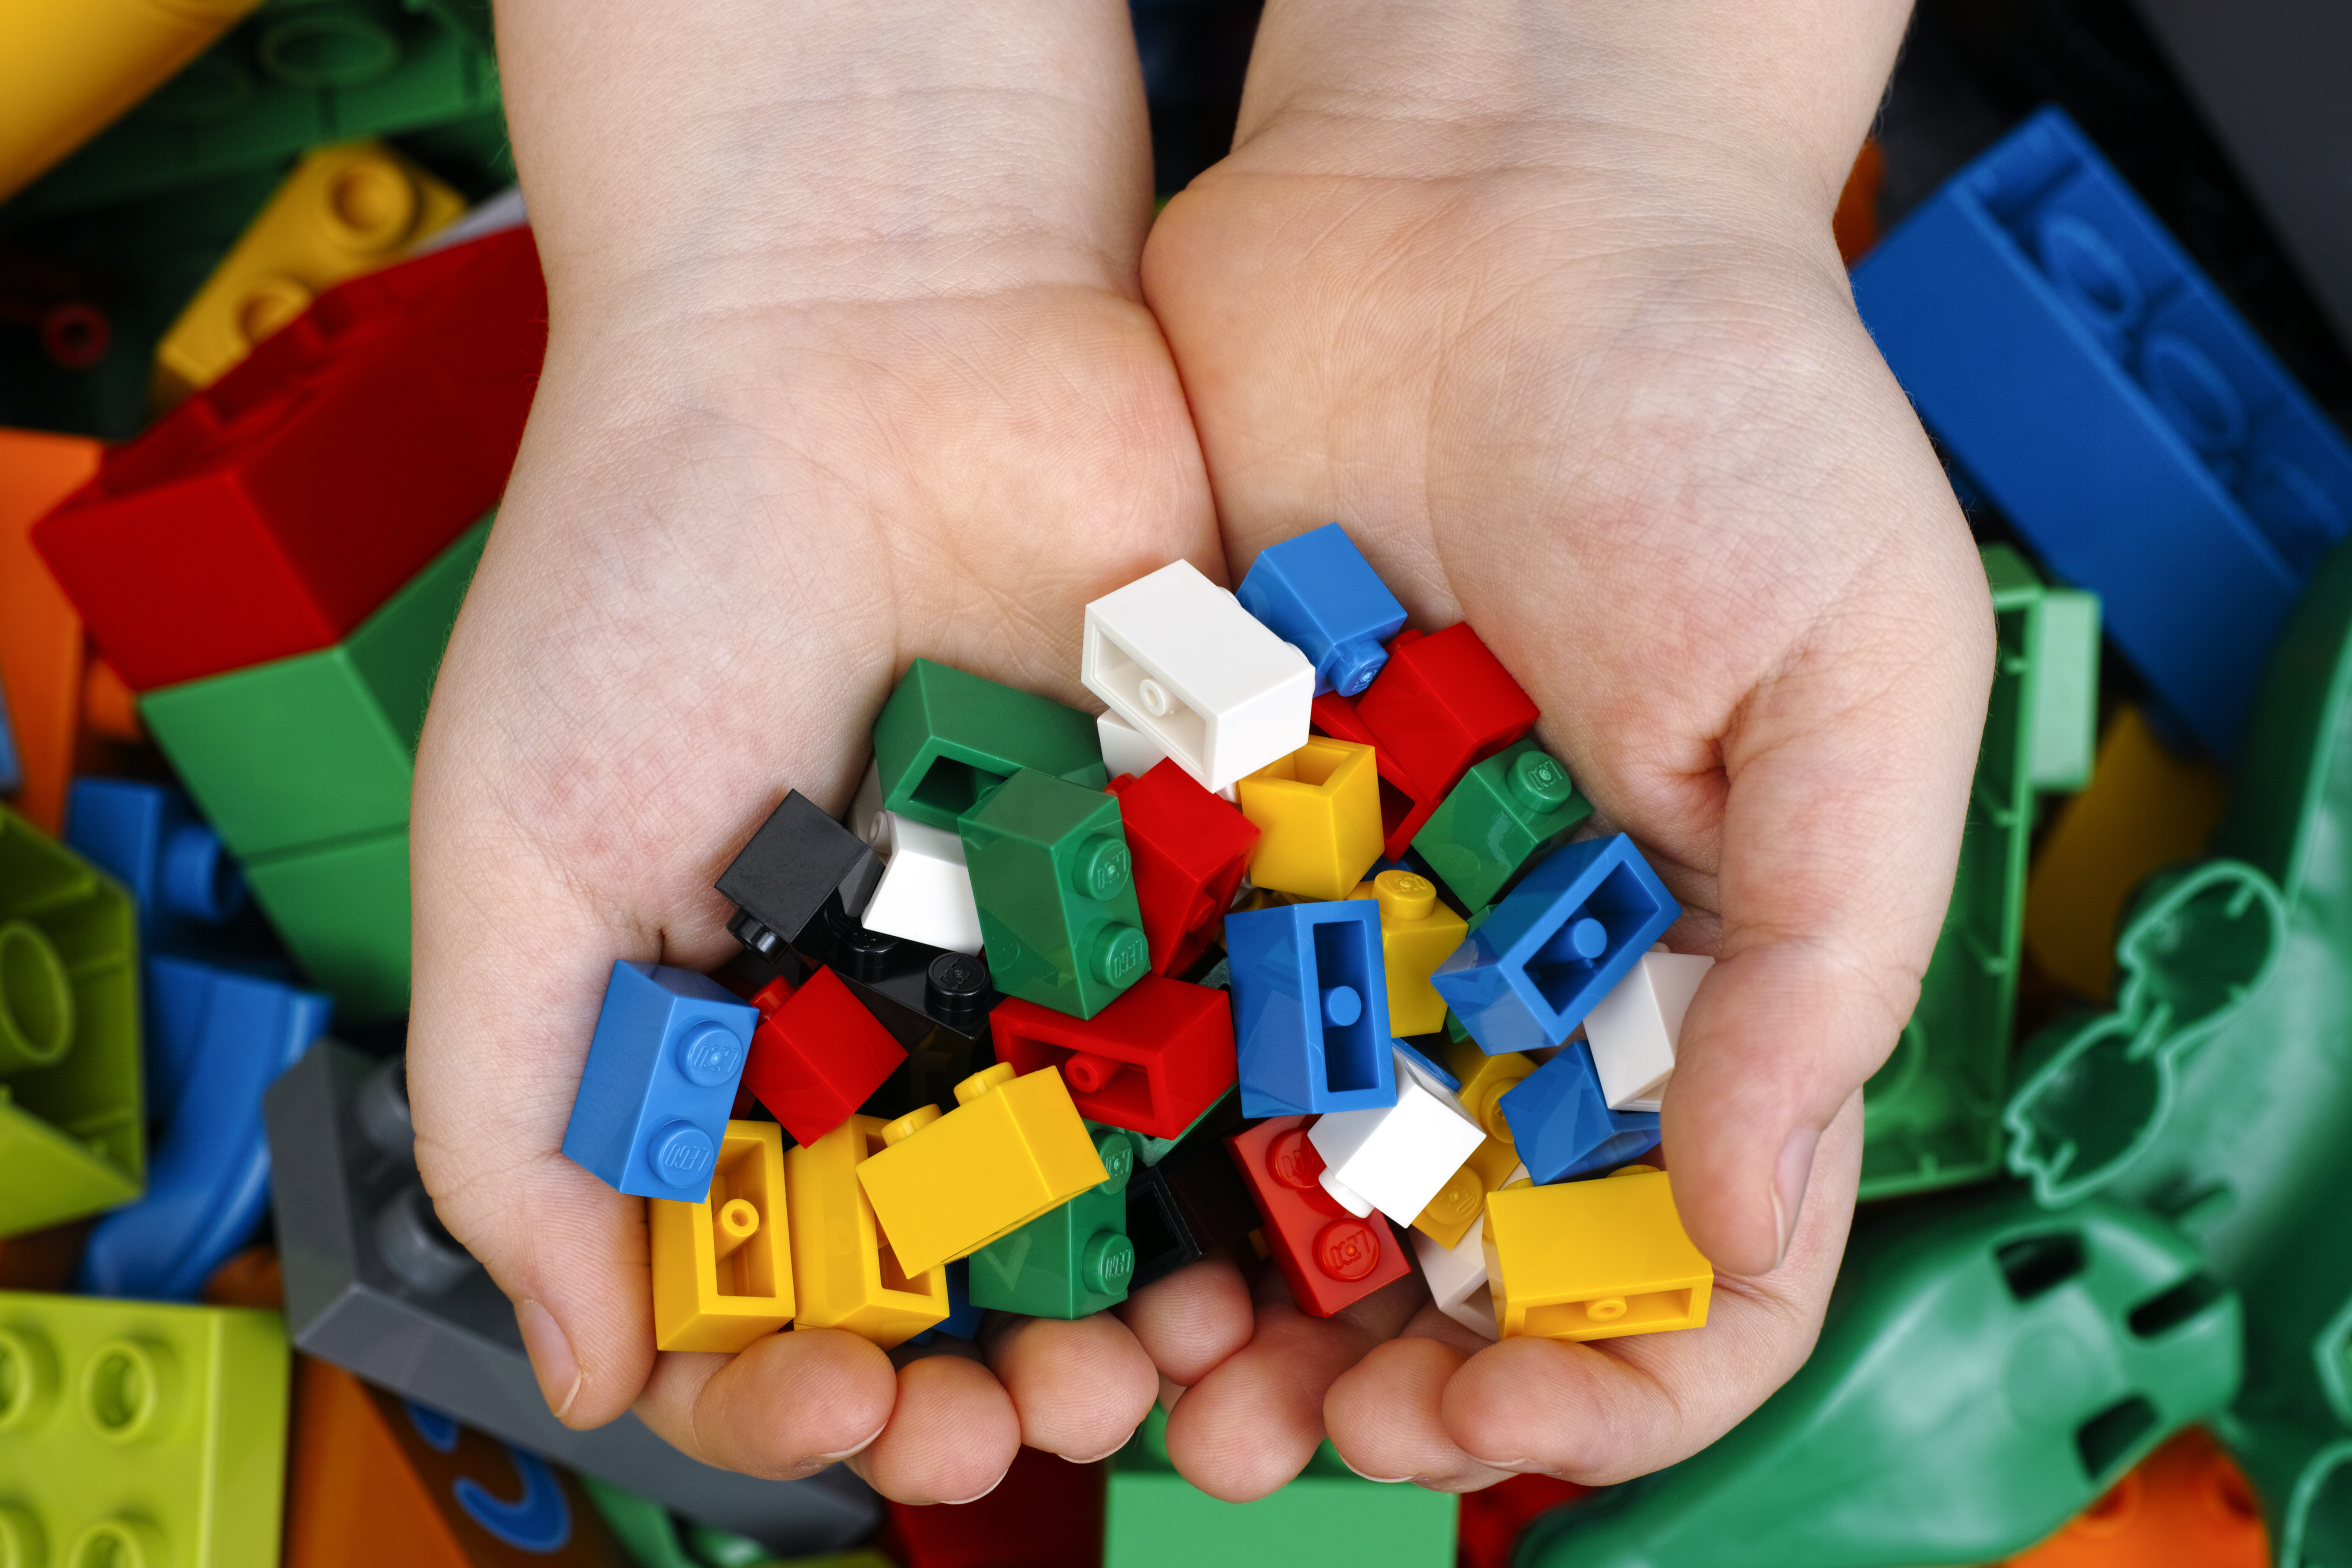 Image of two hands holding LEGO blocks.